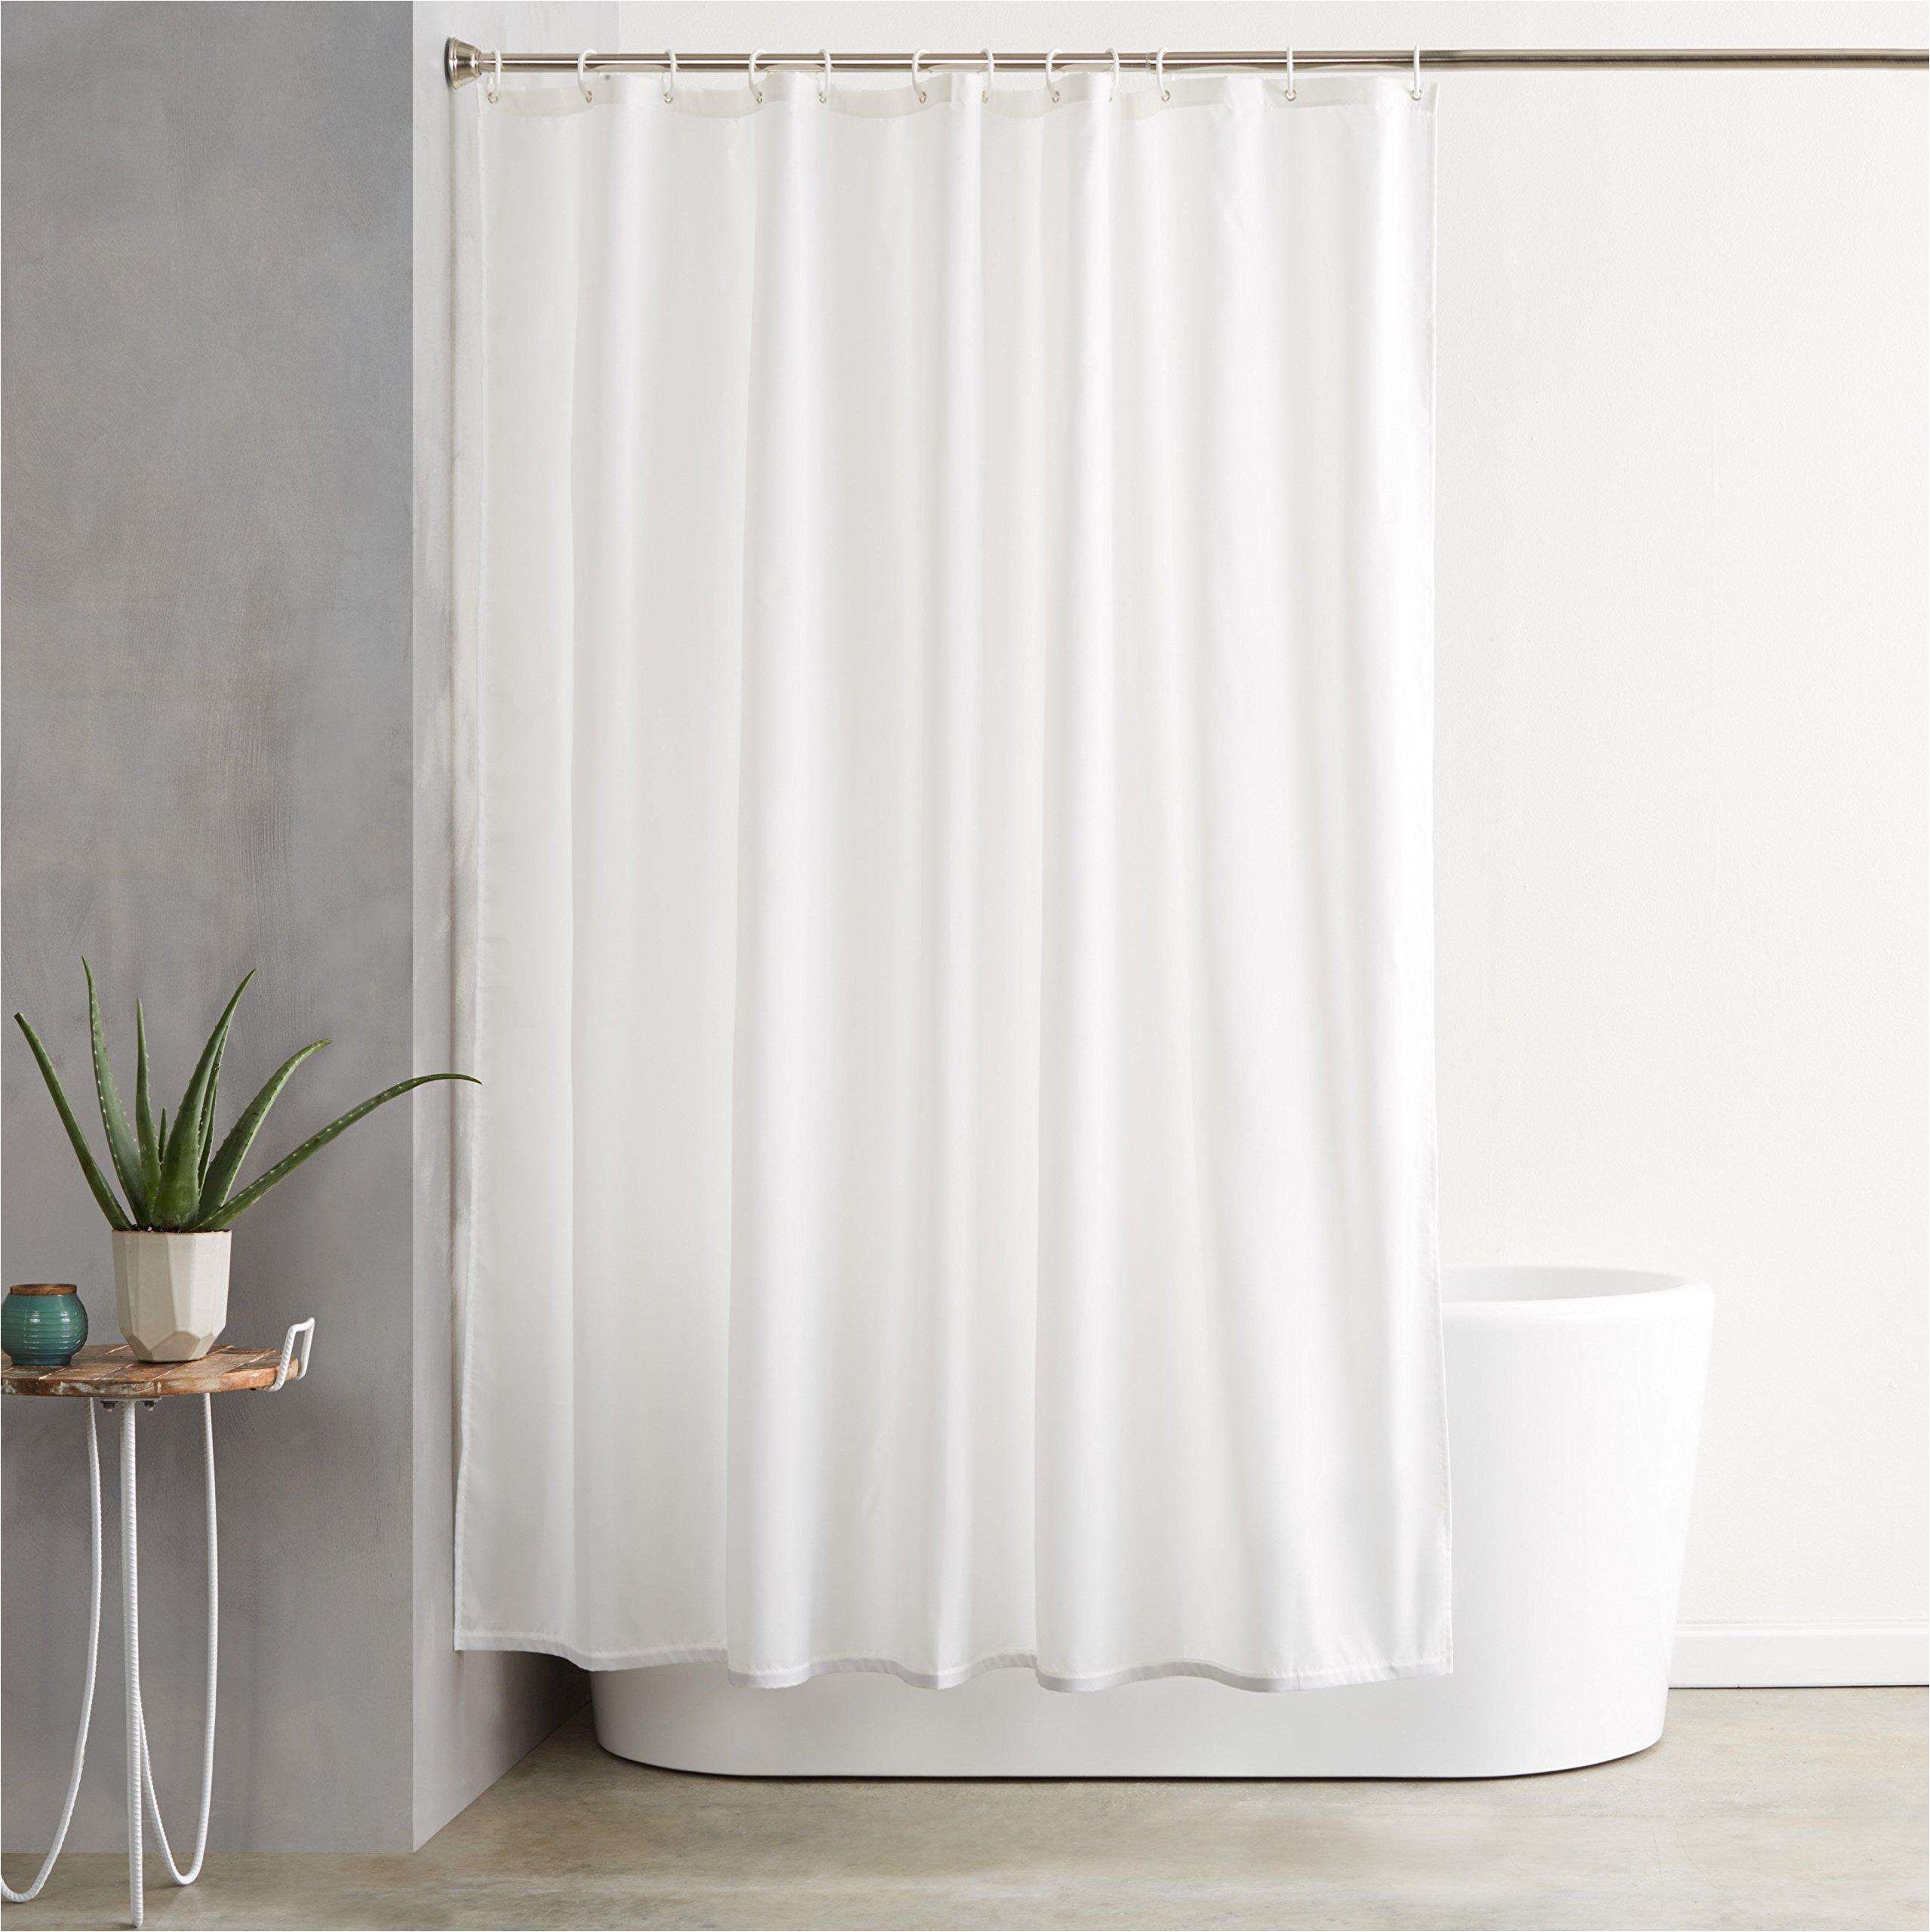 nice shower curtains unique 25 cool ideas shower curtain and window curtain set